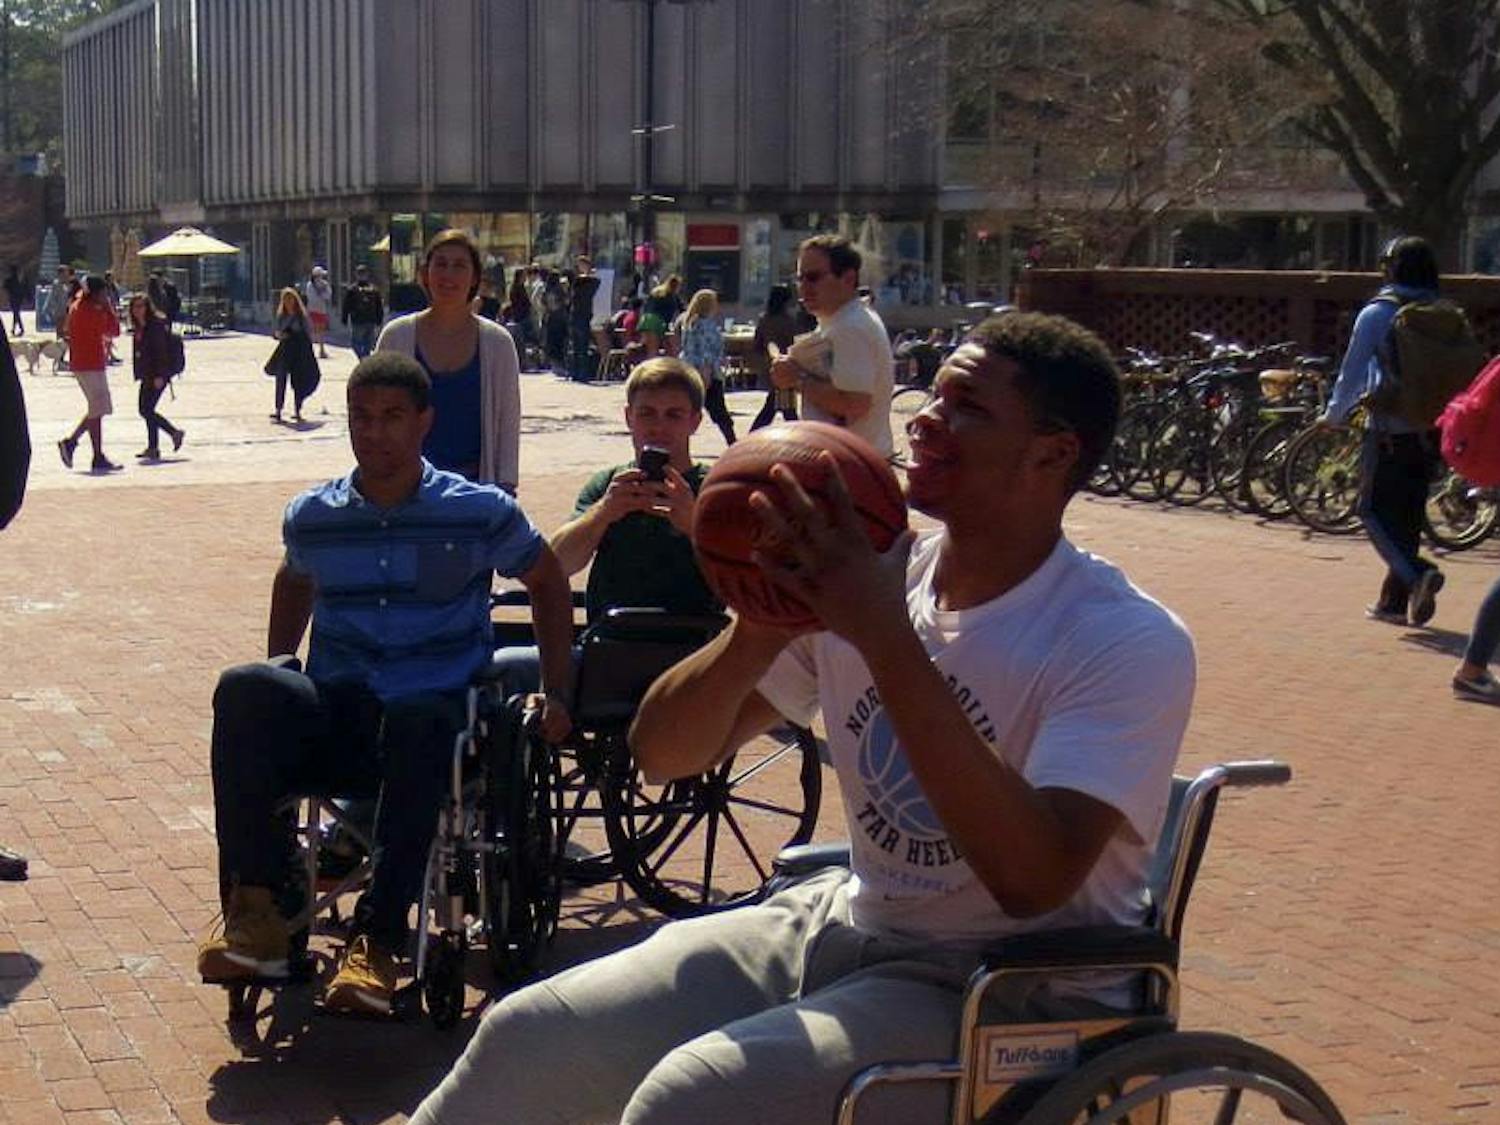 UNC men's basketball forward Kennedy Meeks played&nbsp;basketball in the wheelchair basketball event last year.&nbsp;Photo Courtesy of Lily Stine.